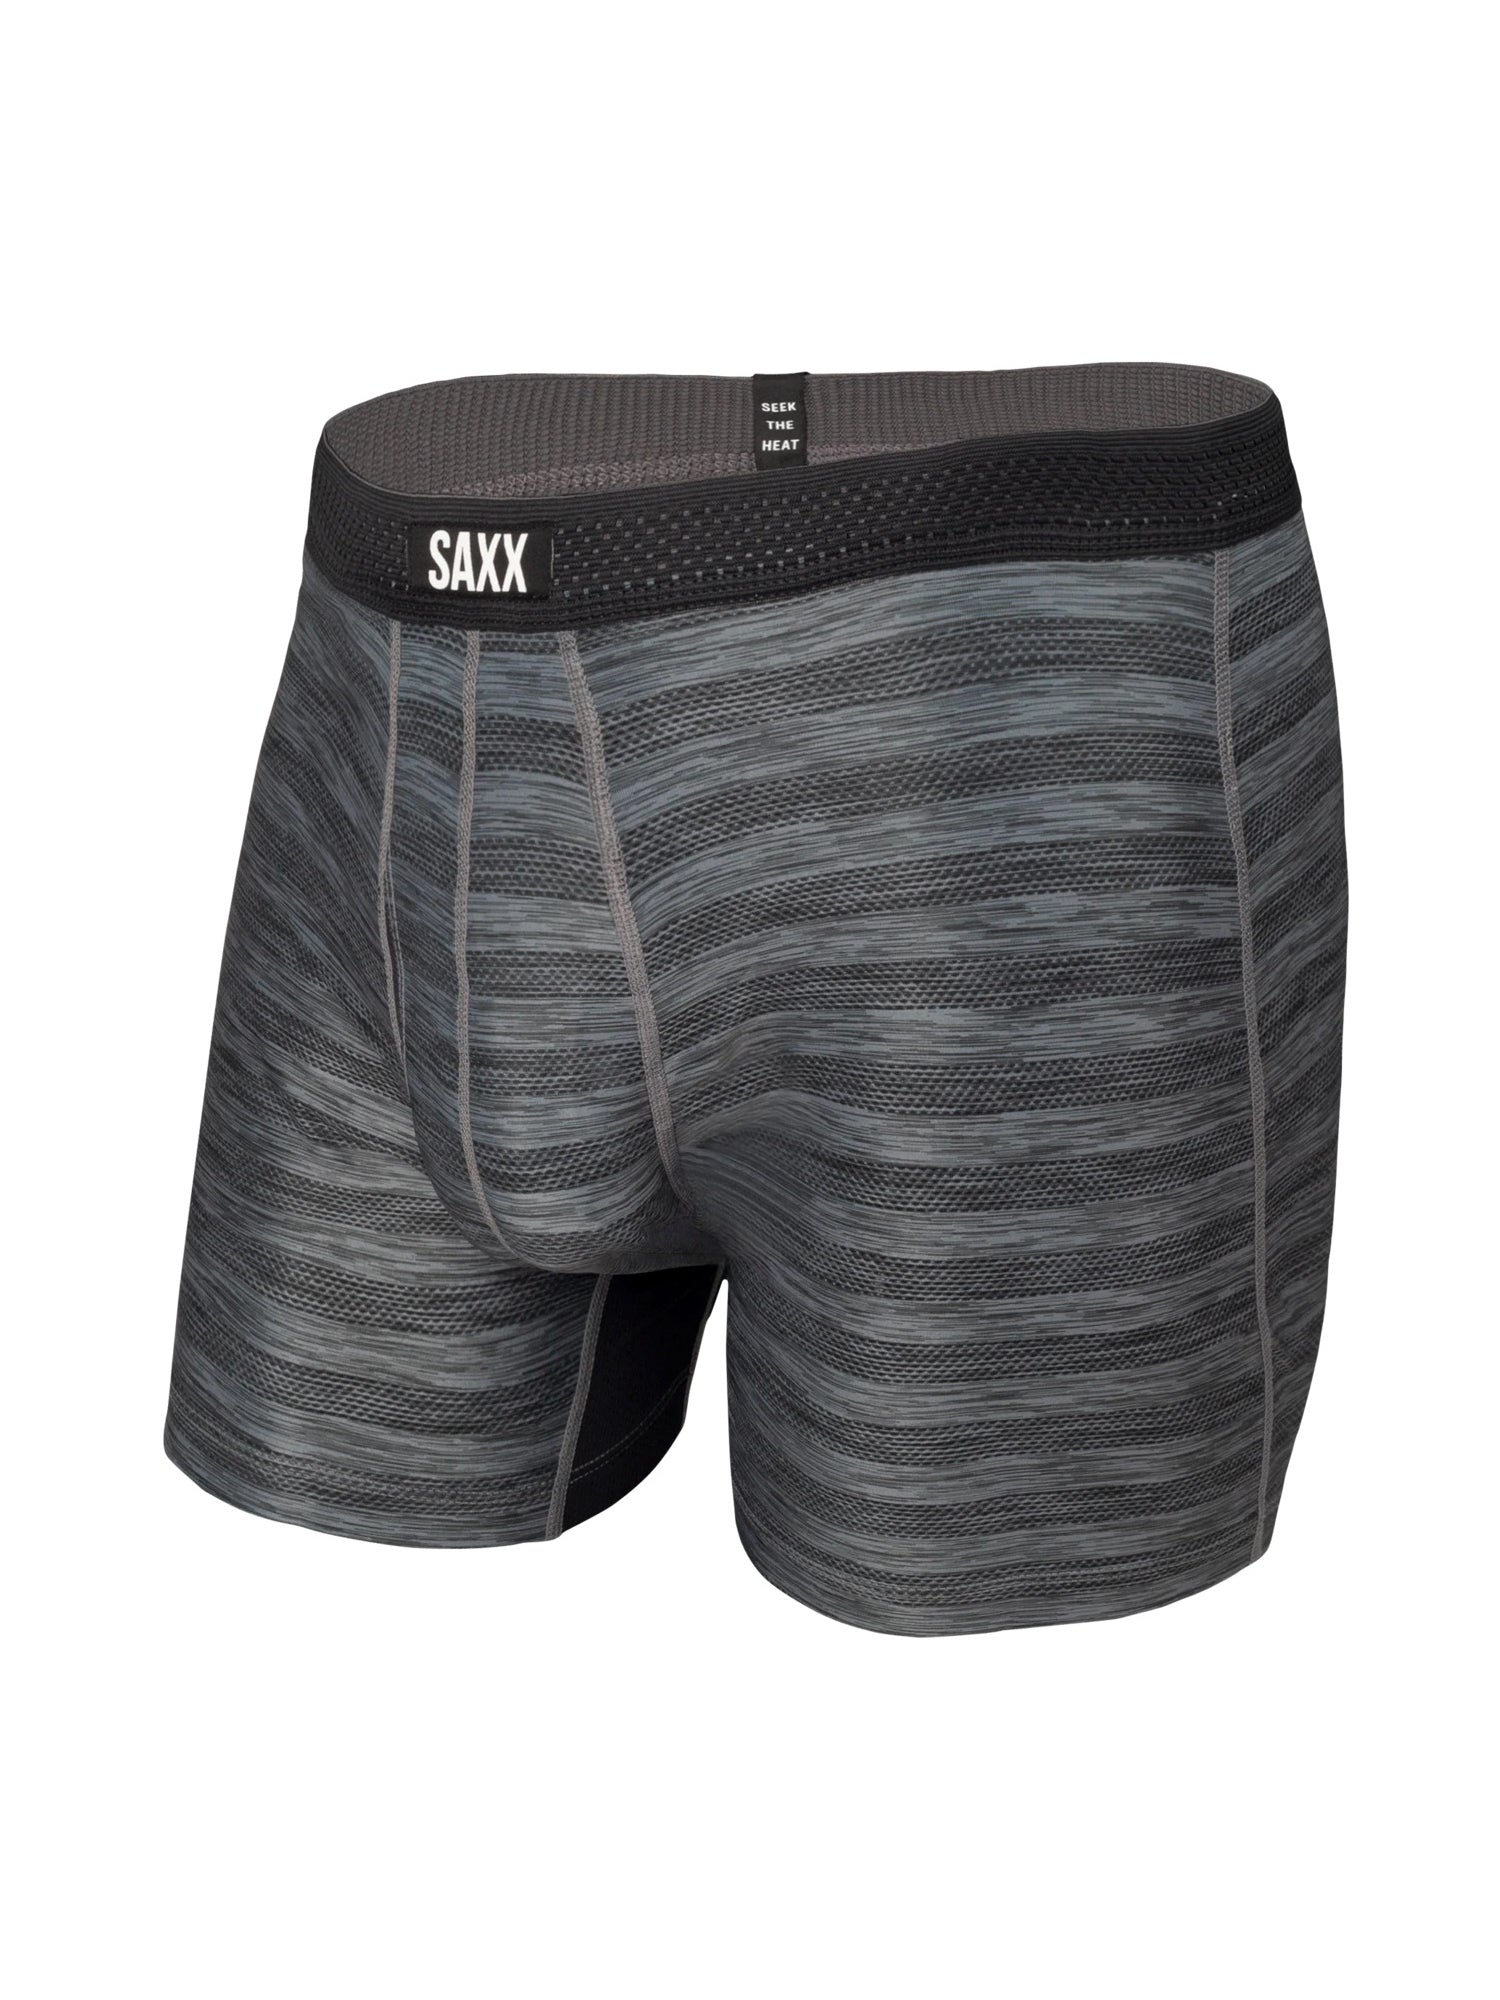 SAXX SNOOZE PANT - BLACK - CLEARANCE